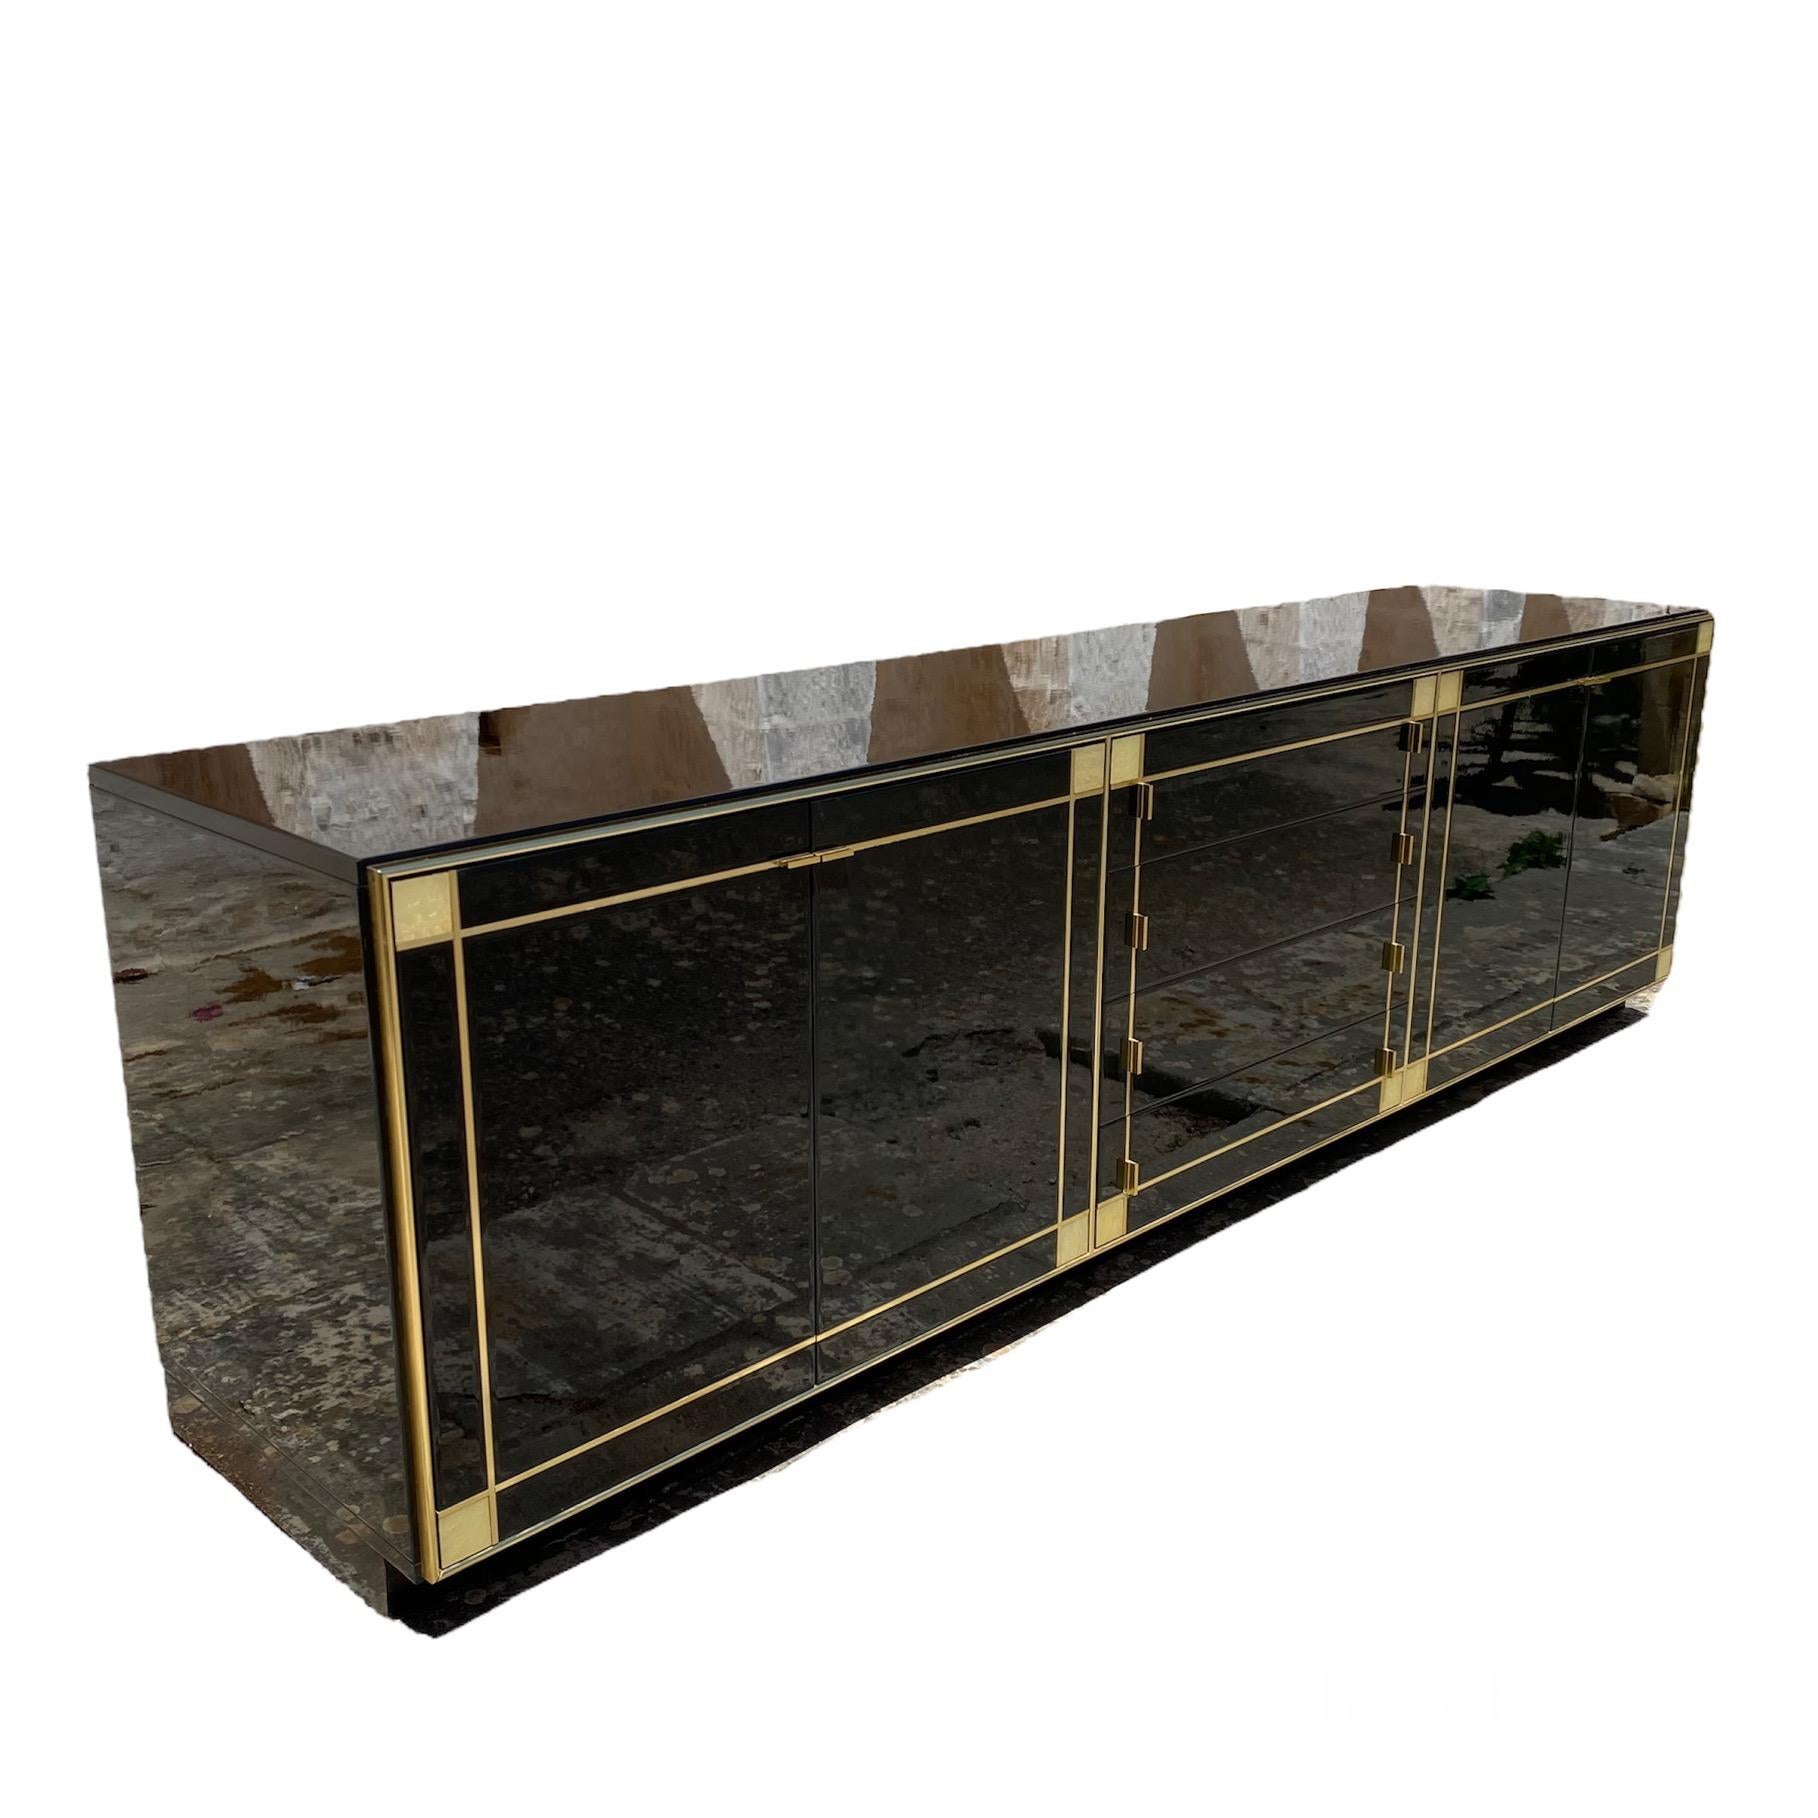 Wonderful Vintage sideboard by Pierre Cardin produced by Roche Bobois in black lacquered wood, mother of pearl and brass characterized by thick brass lines that frame the sideboard itself.
The glossy black lacquer, combined with bright brass